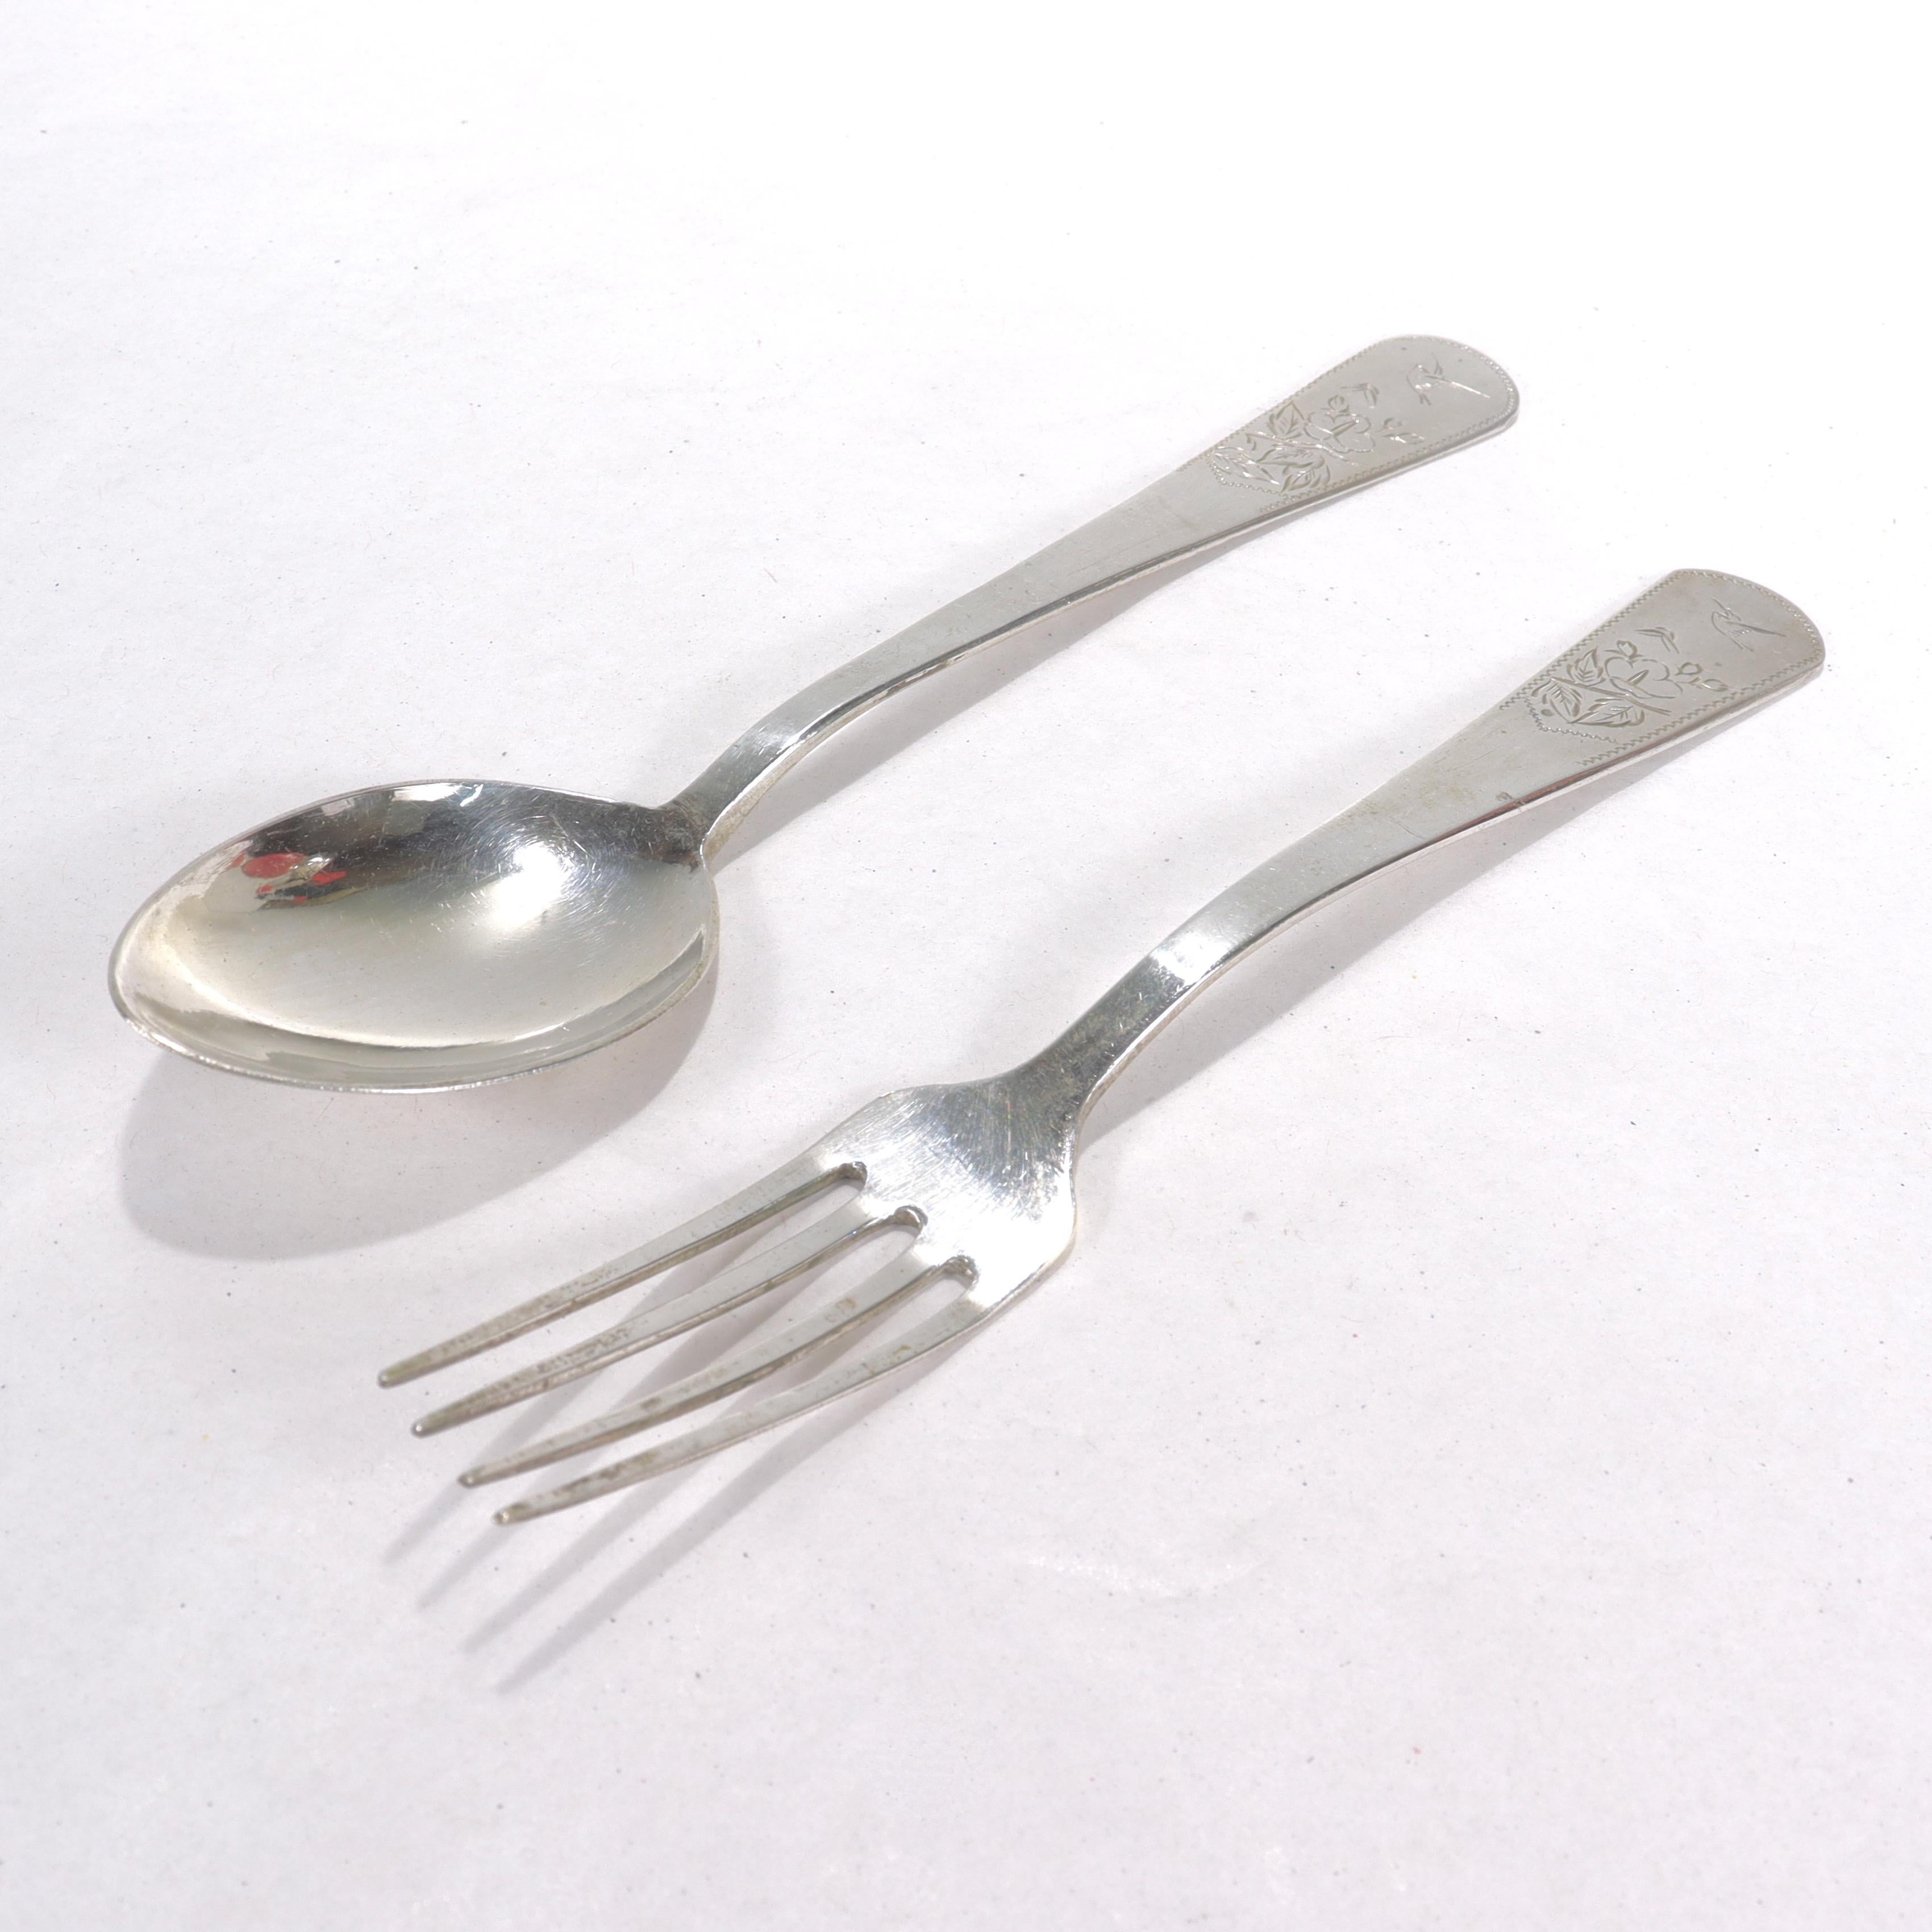 A fine Chinese export silver fork & spoon.

Each with flowers and birds engraved to the front of the handle.

The spoon is engraved with 